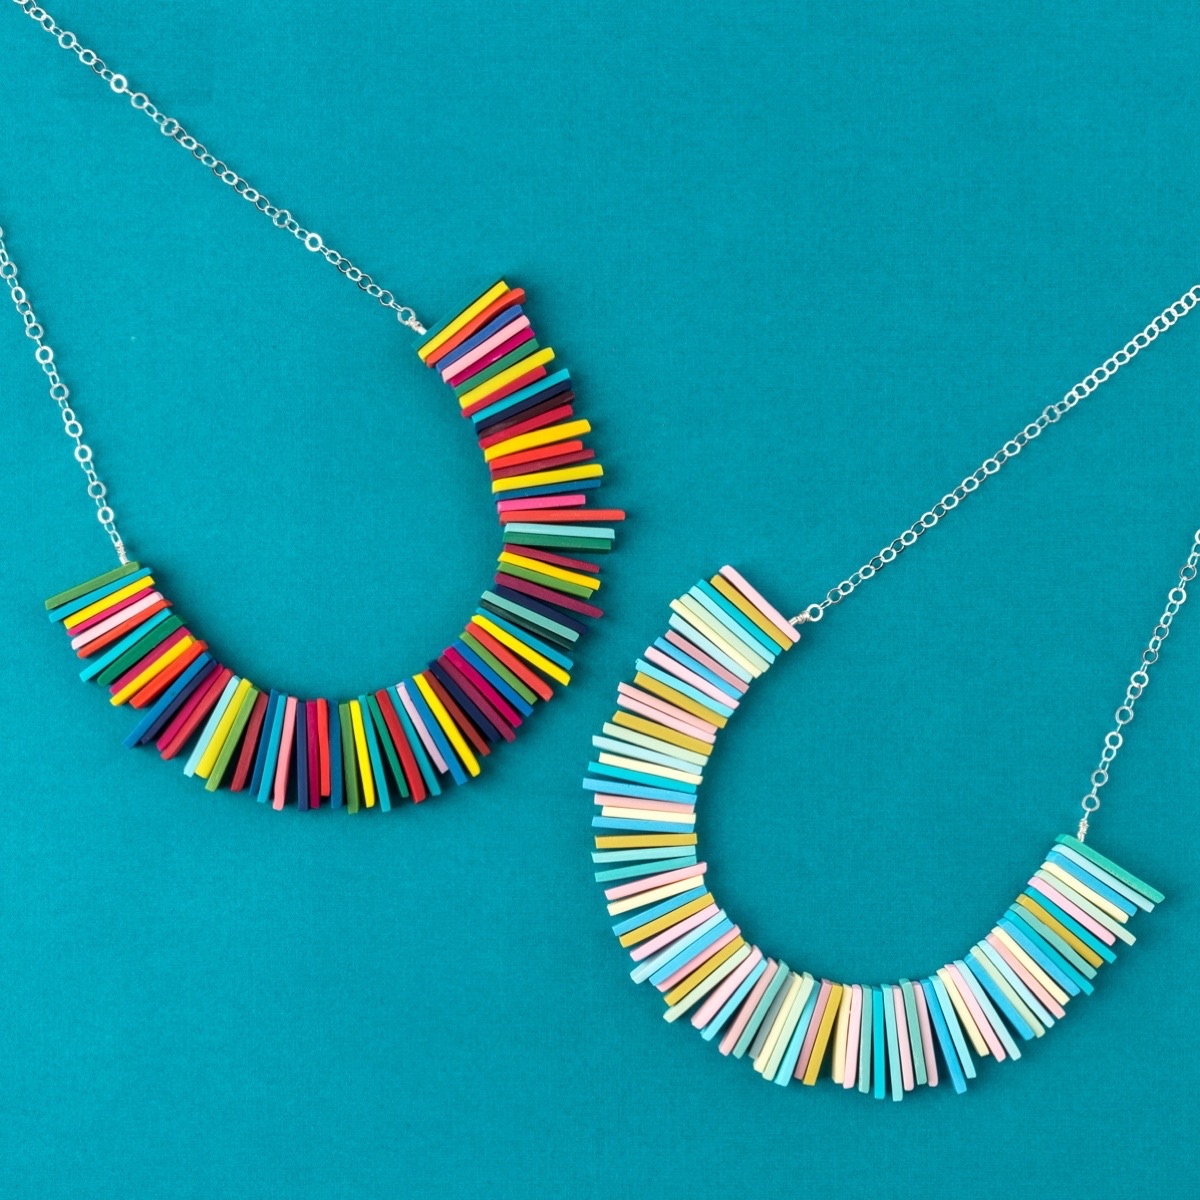 Contemporary Beaded Necklaces handmade jewellery by Colour Designs 